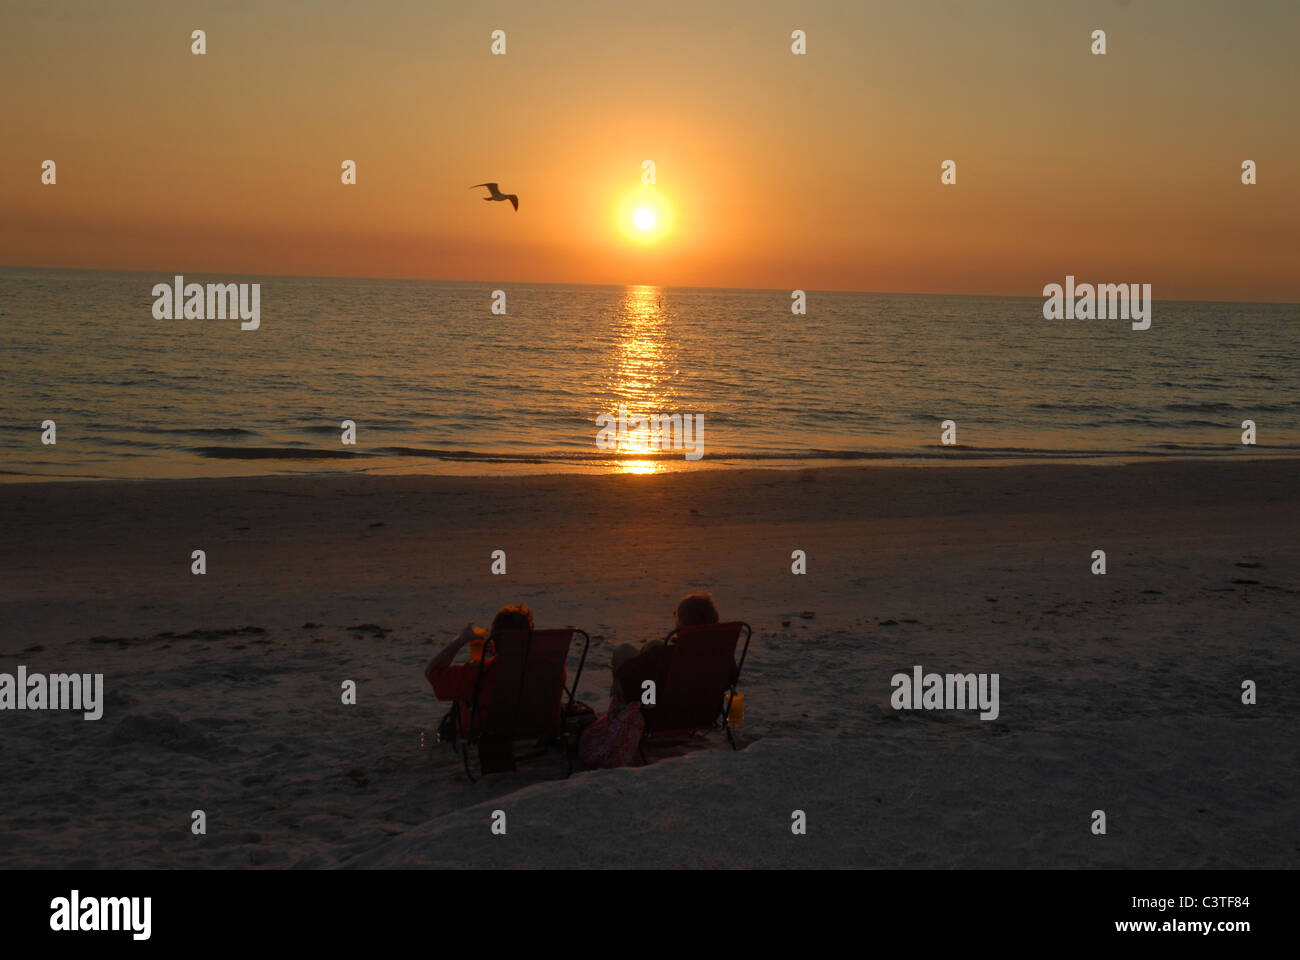 The sun sets as two people watch the sun set St. Pete Beach, Florida. Stock Photo